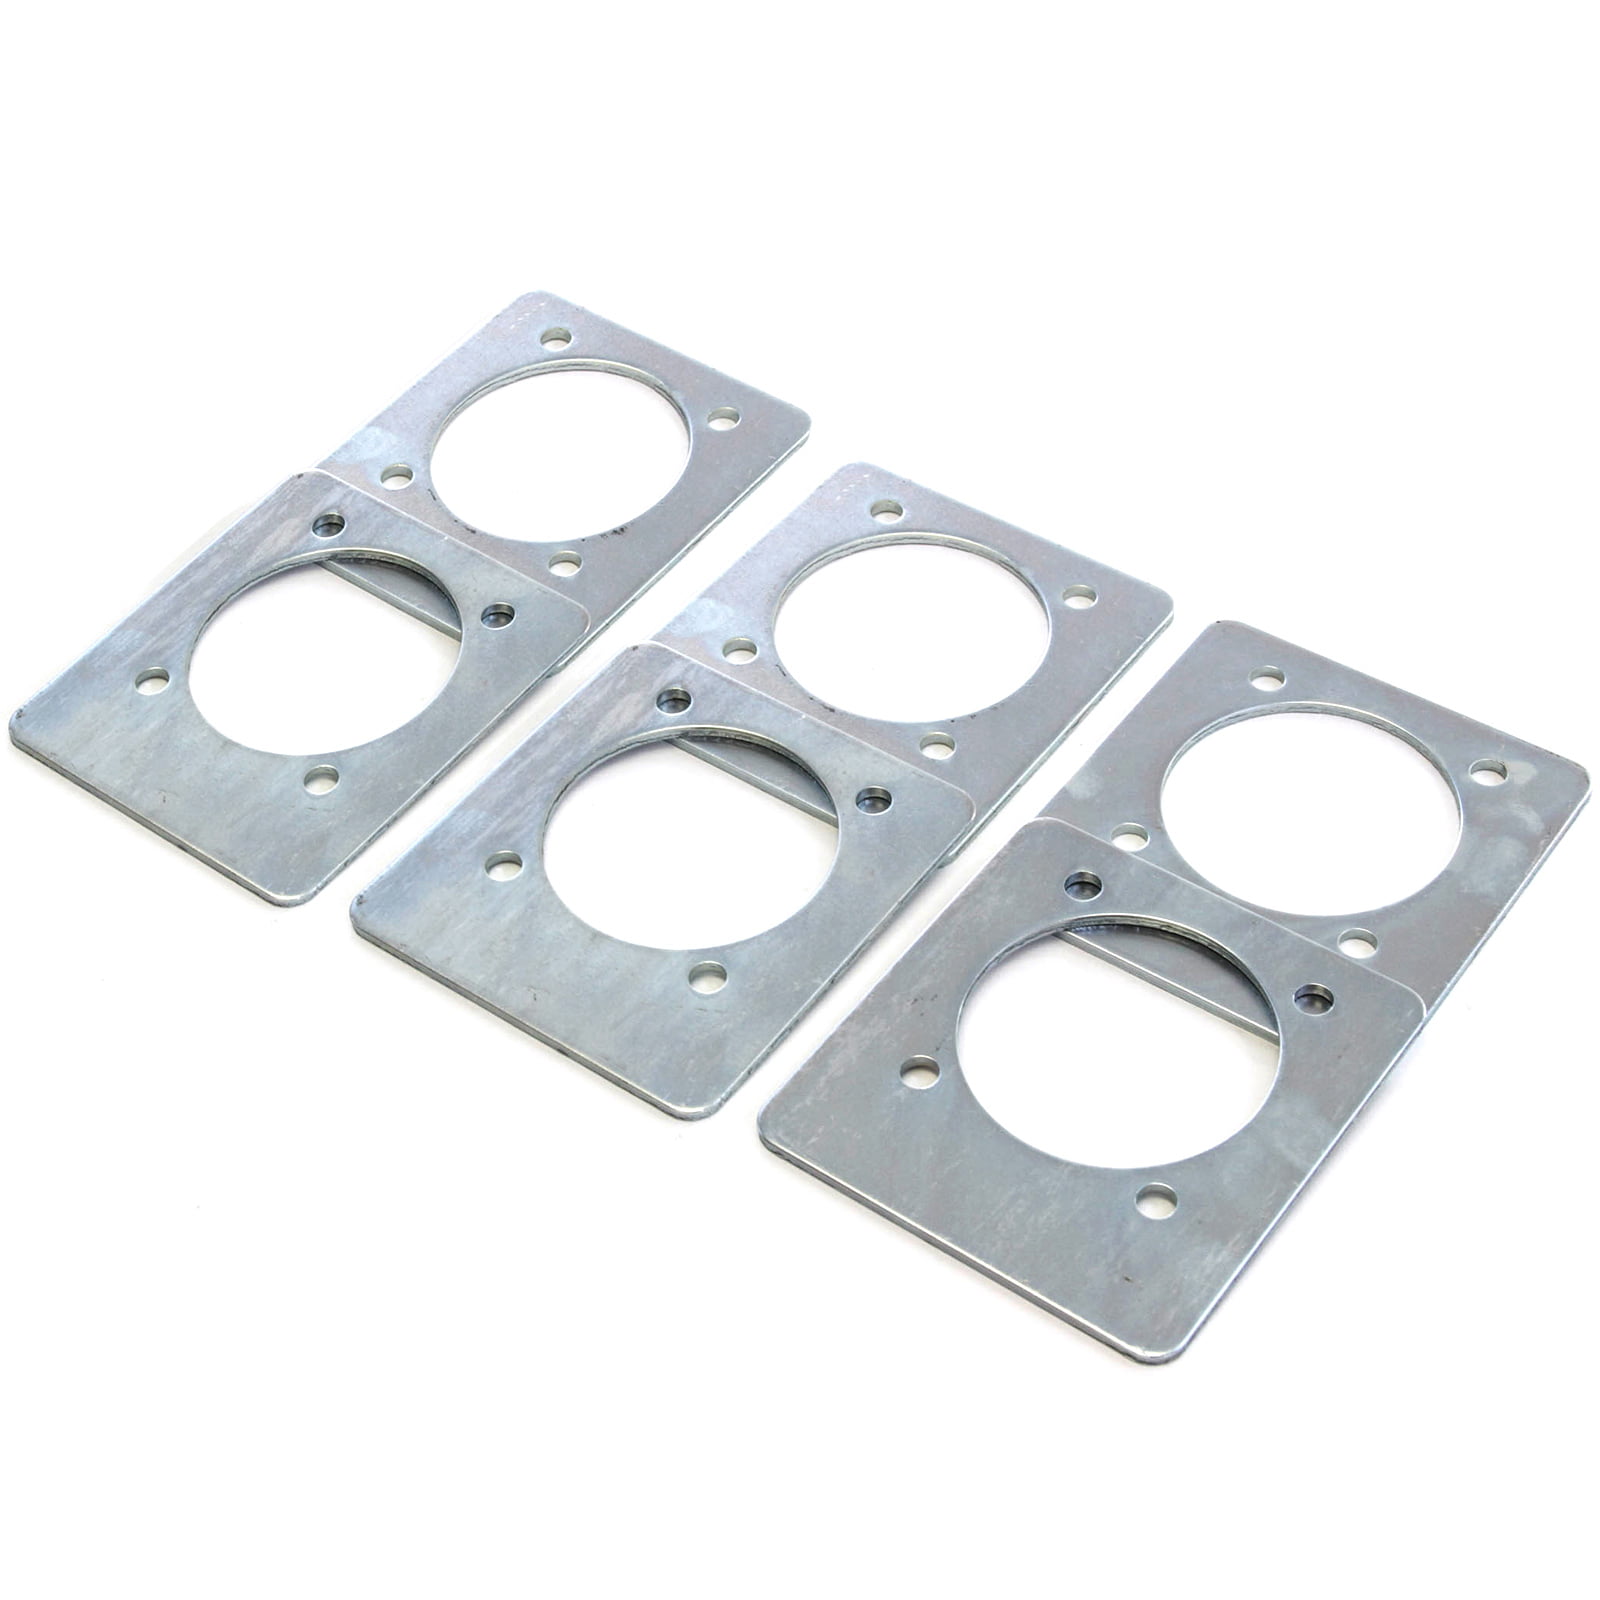 6) Backing Plate Mounting Plates for D Ring Plate Tie Down Recessed ...